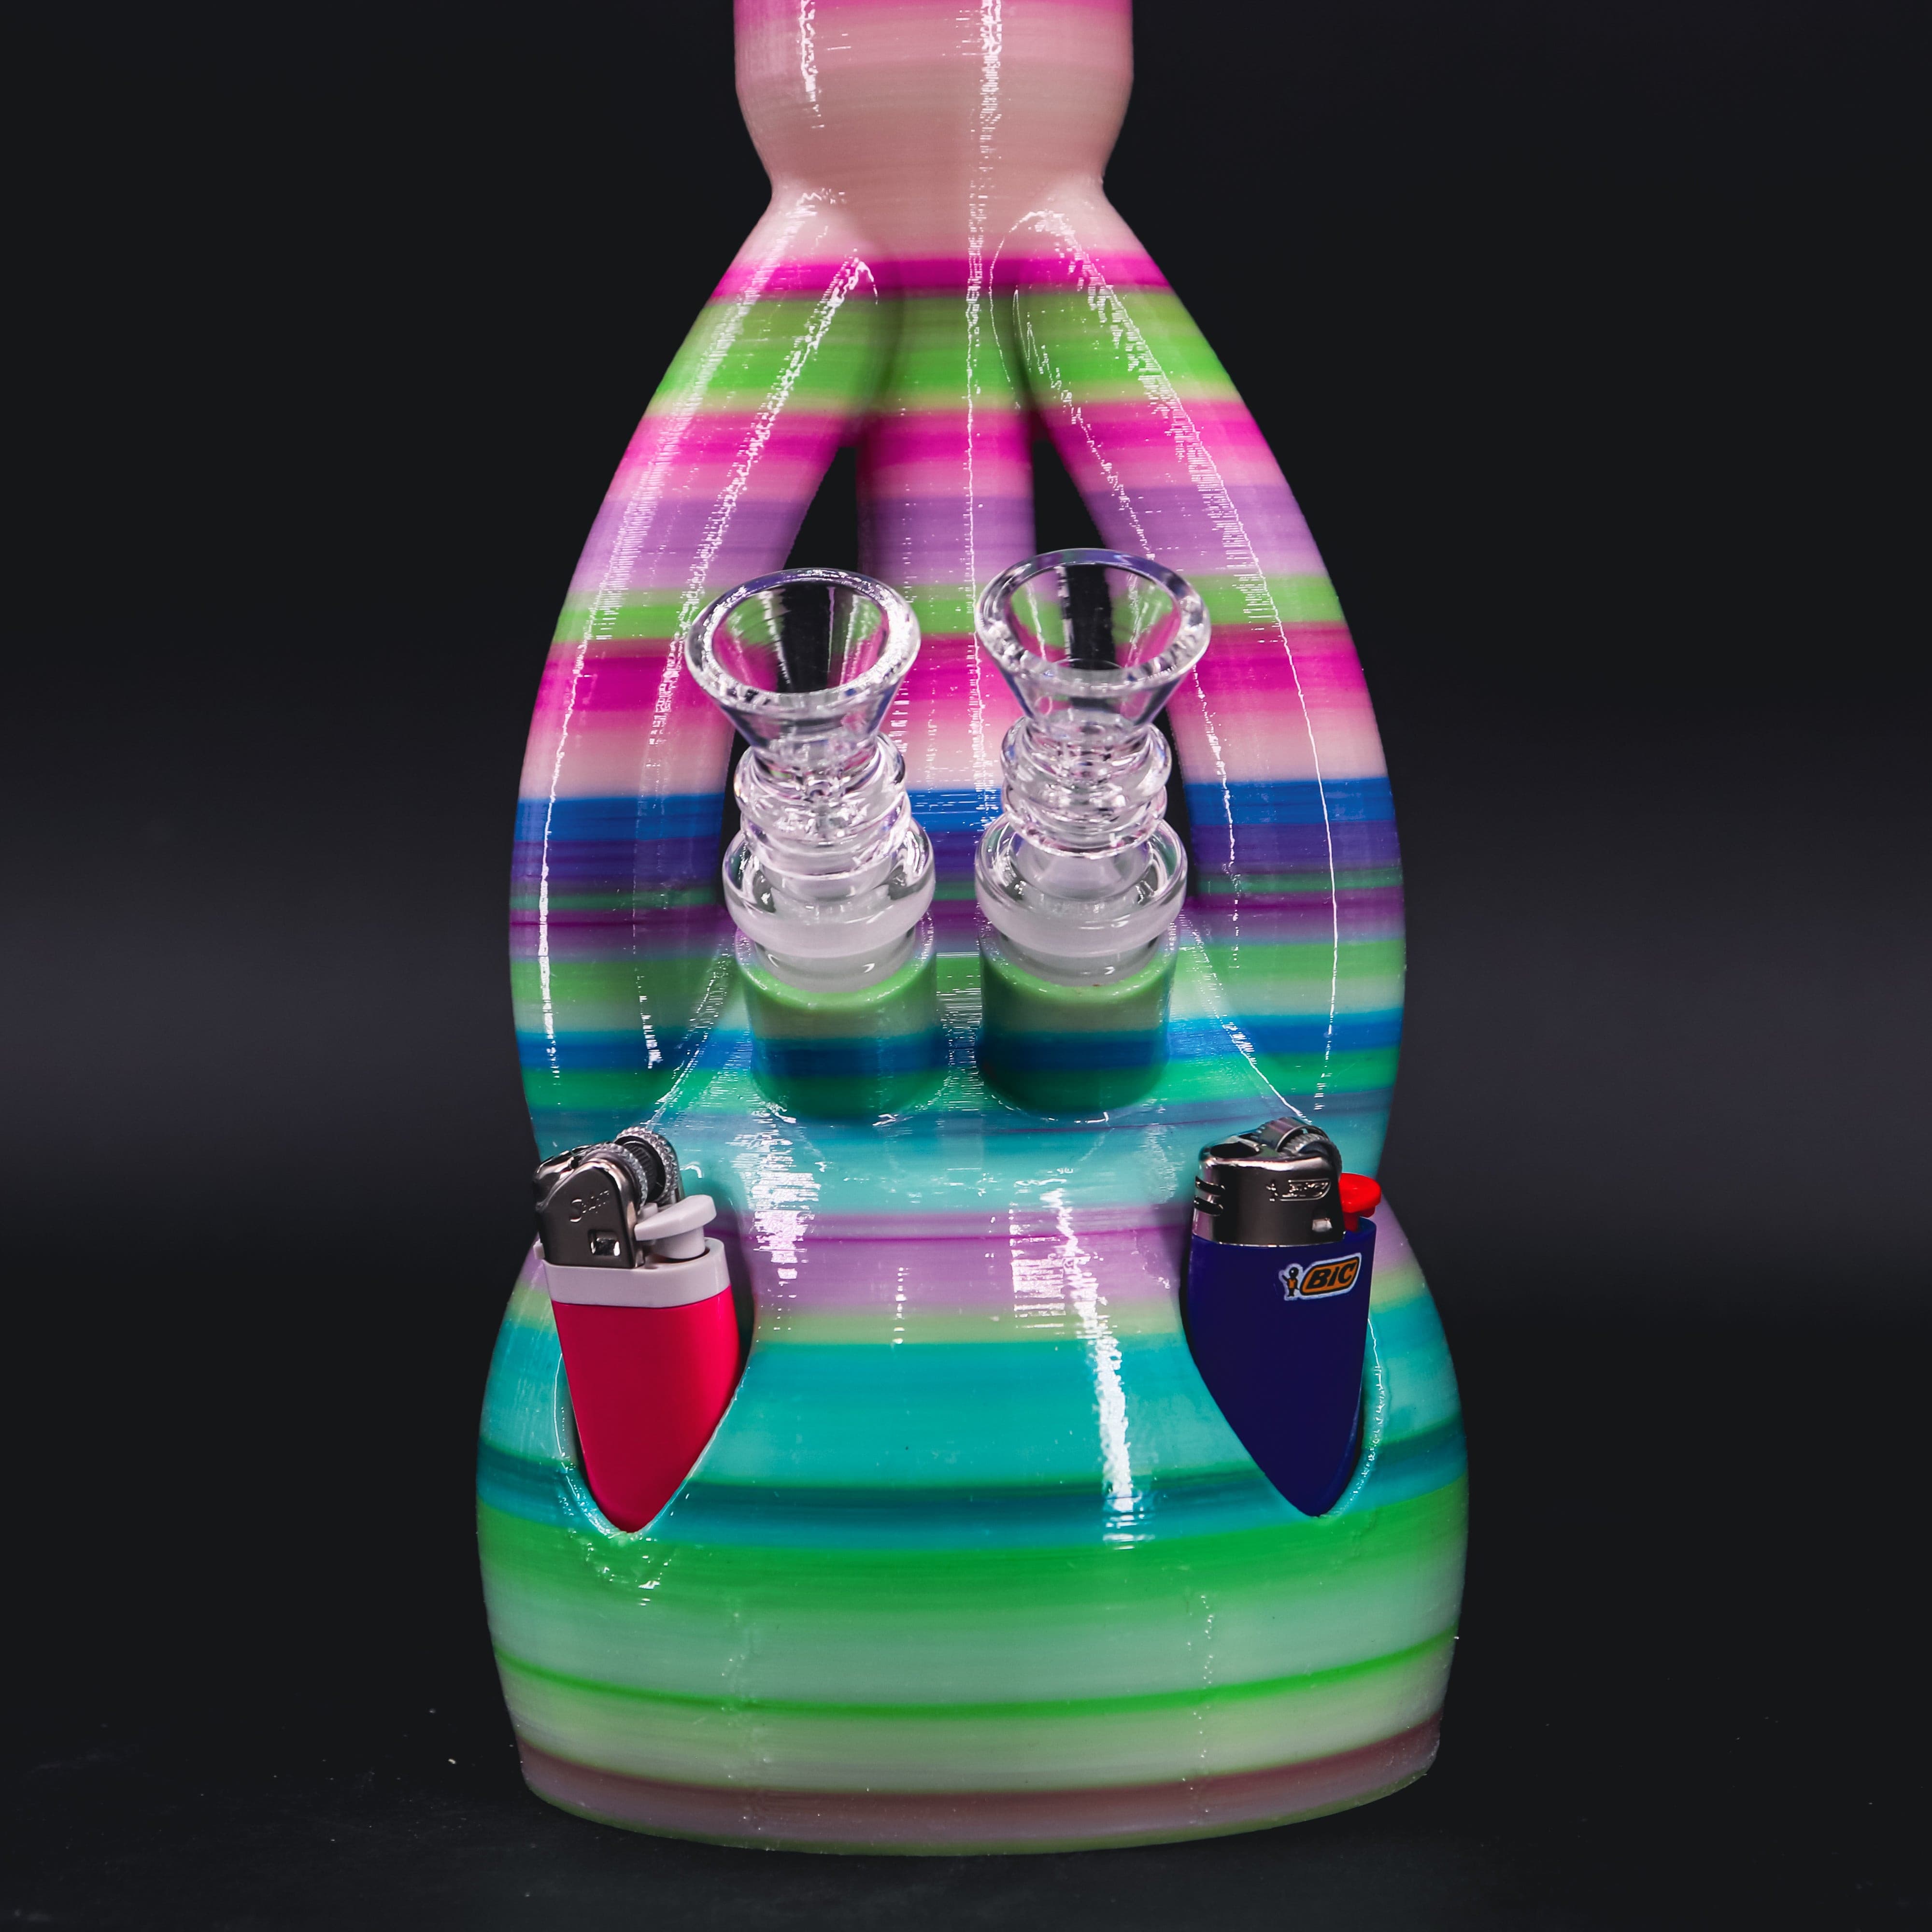 Summertime Bubble Gum color of The Duo - Amazing 3D Printed Water Pipe by Kayd Mayd.